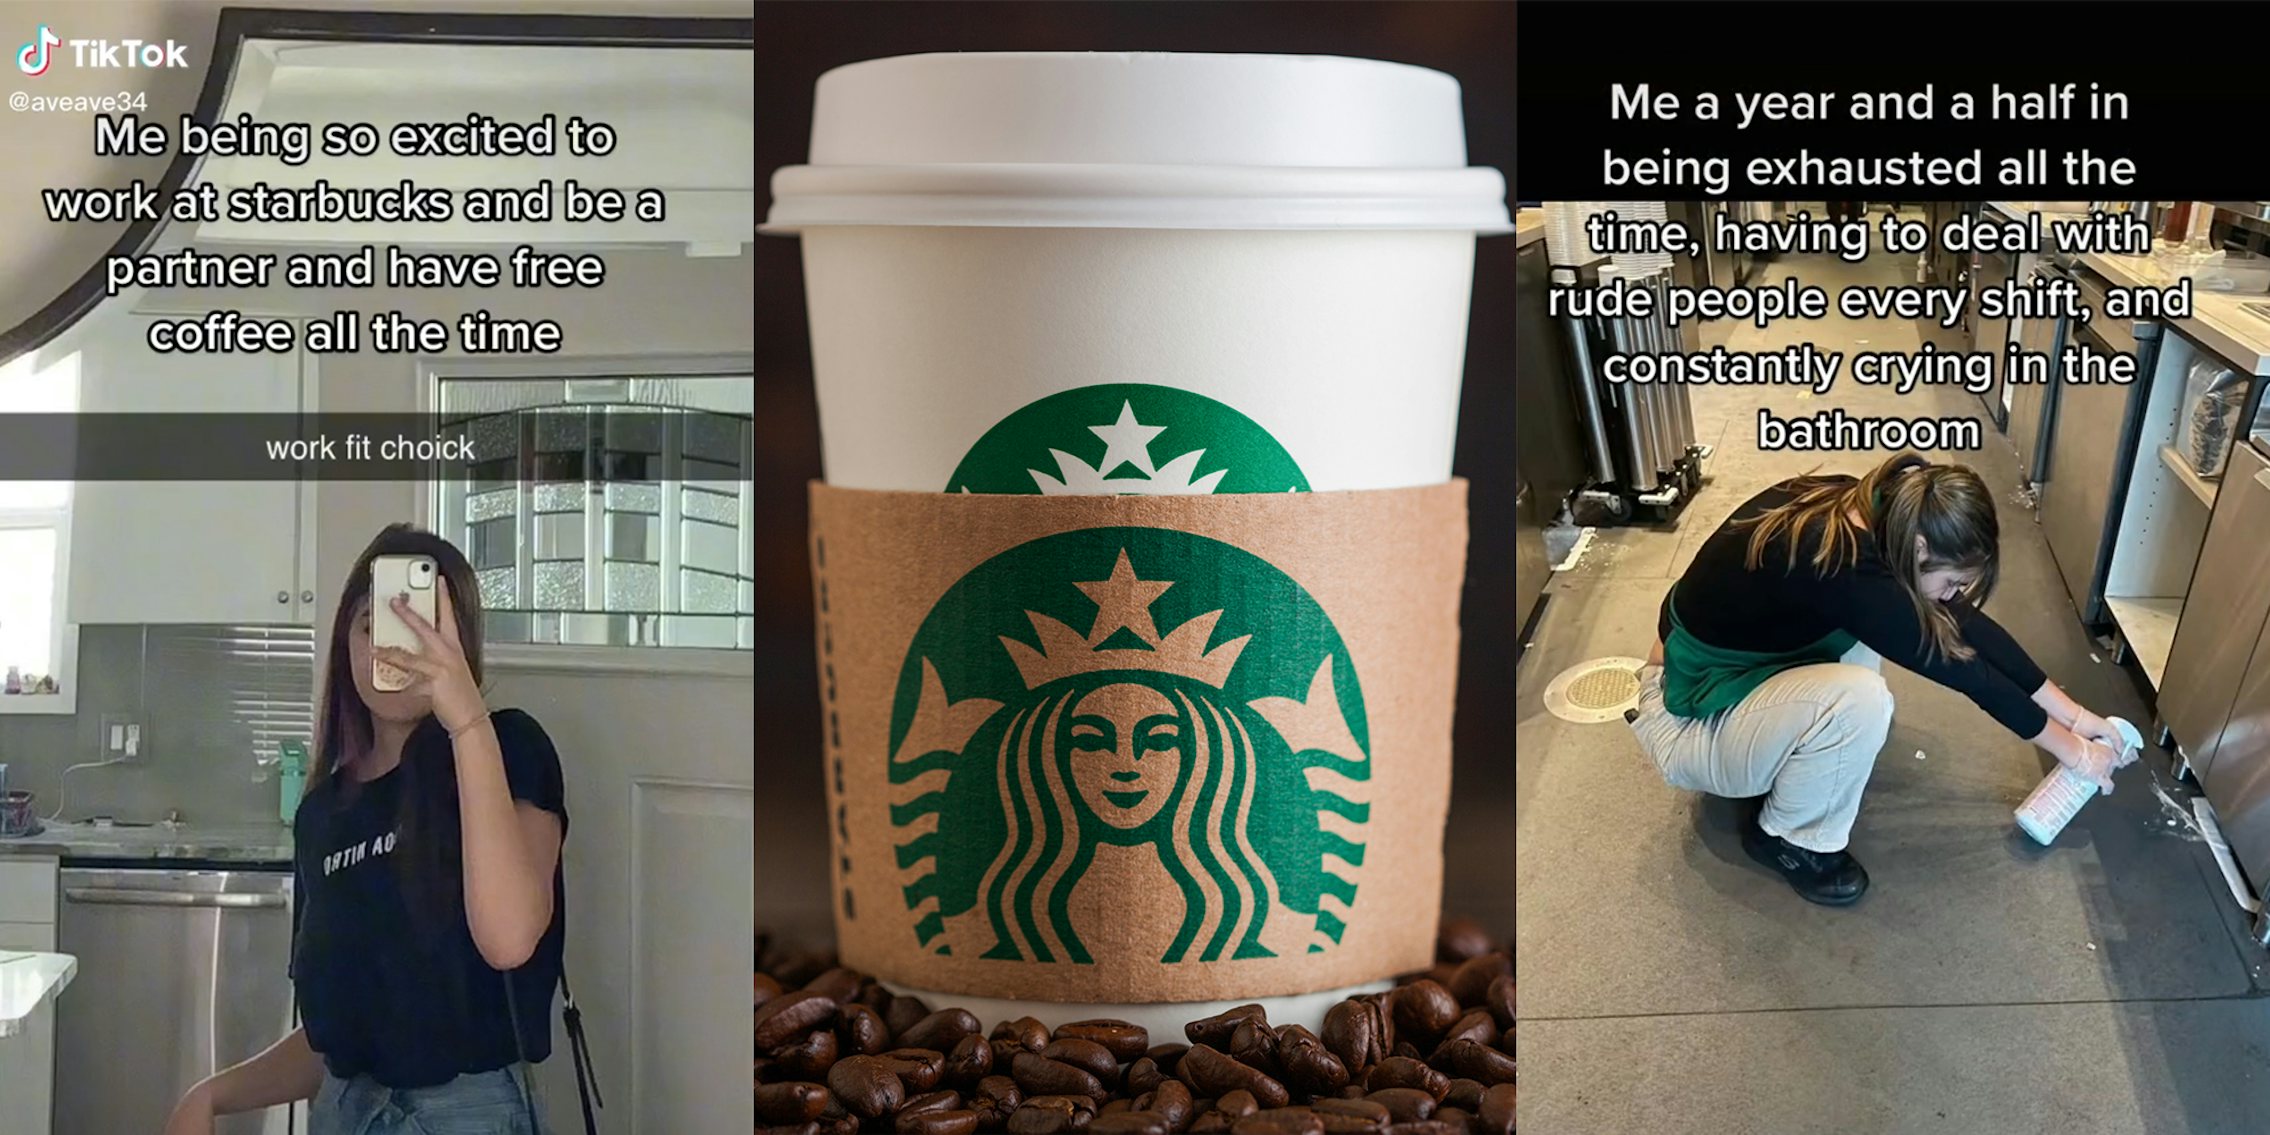 young woman with caption 'Me being so excited to work at starbucks and be a partner and have free coffee all the time' (l) starbucks coffee cup with beans (c) woman spraying under cabinets with caption 'Me a year and half in being exhausted all the time, having to deal with rude people every shift, and constantly crying in the bathroom' (r)